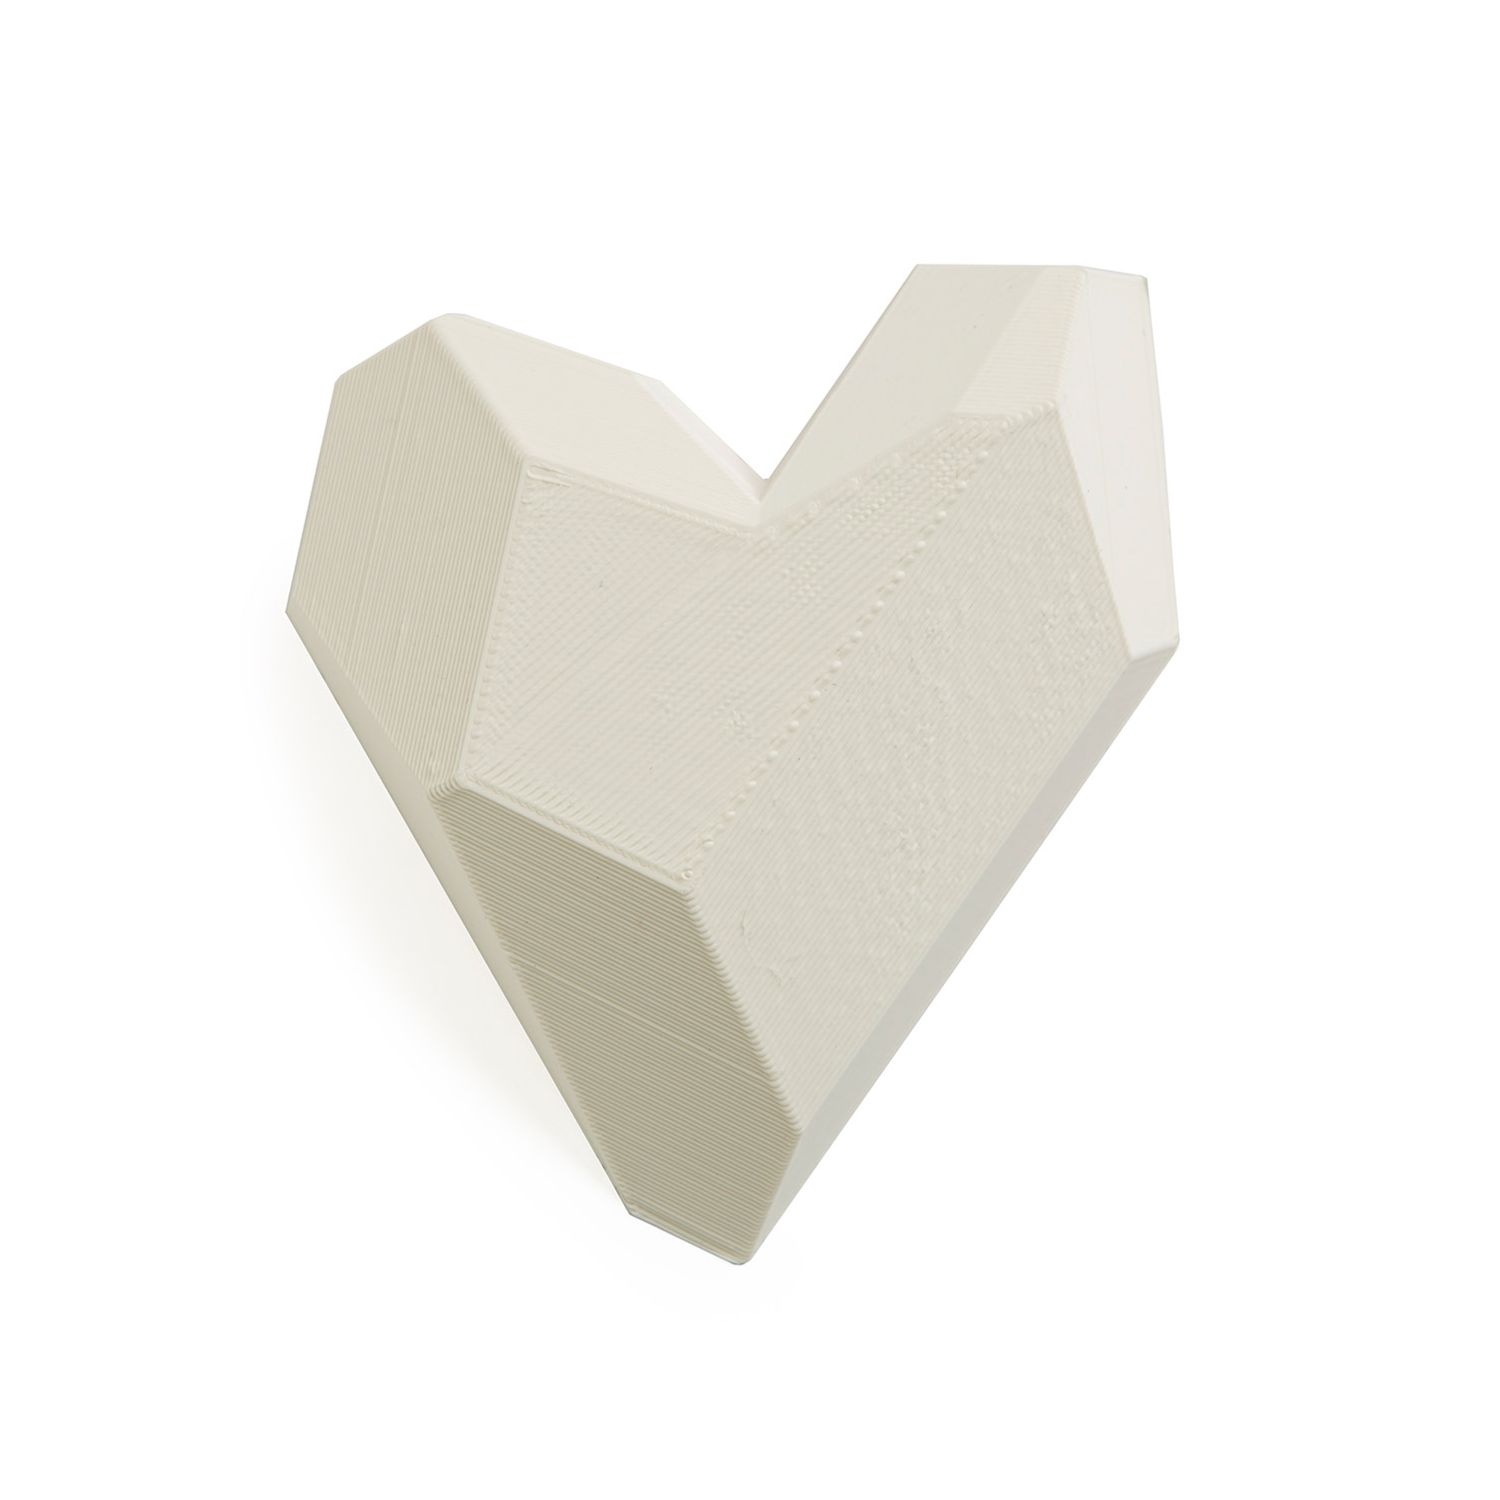 Maison 203: Mini Heart Brooch – White Product Image 1 of 3